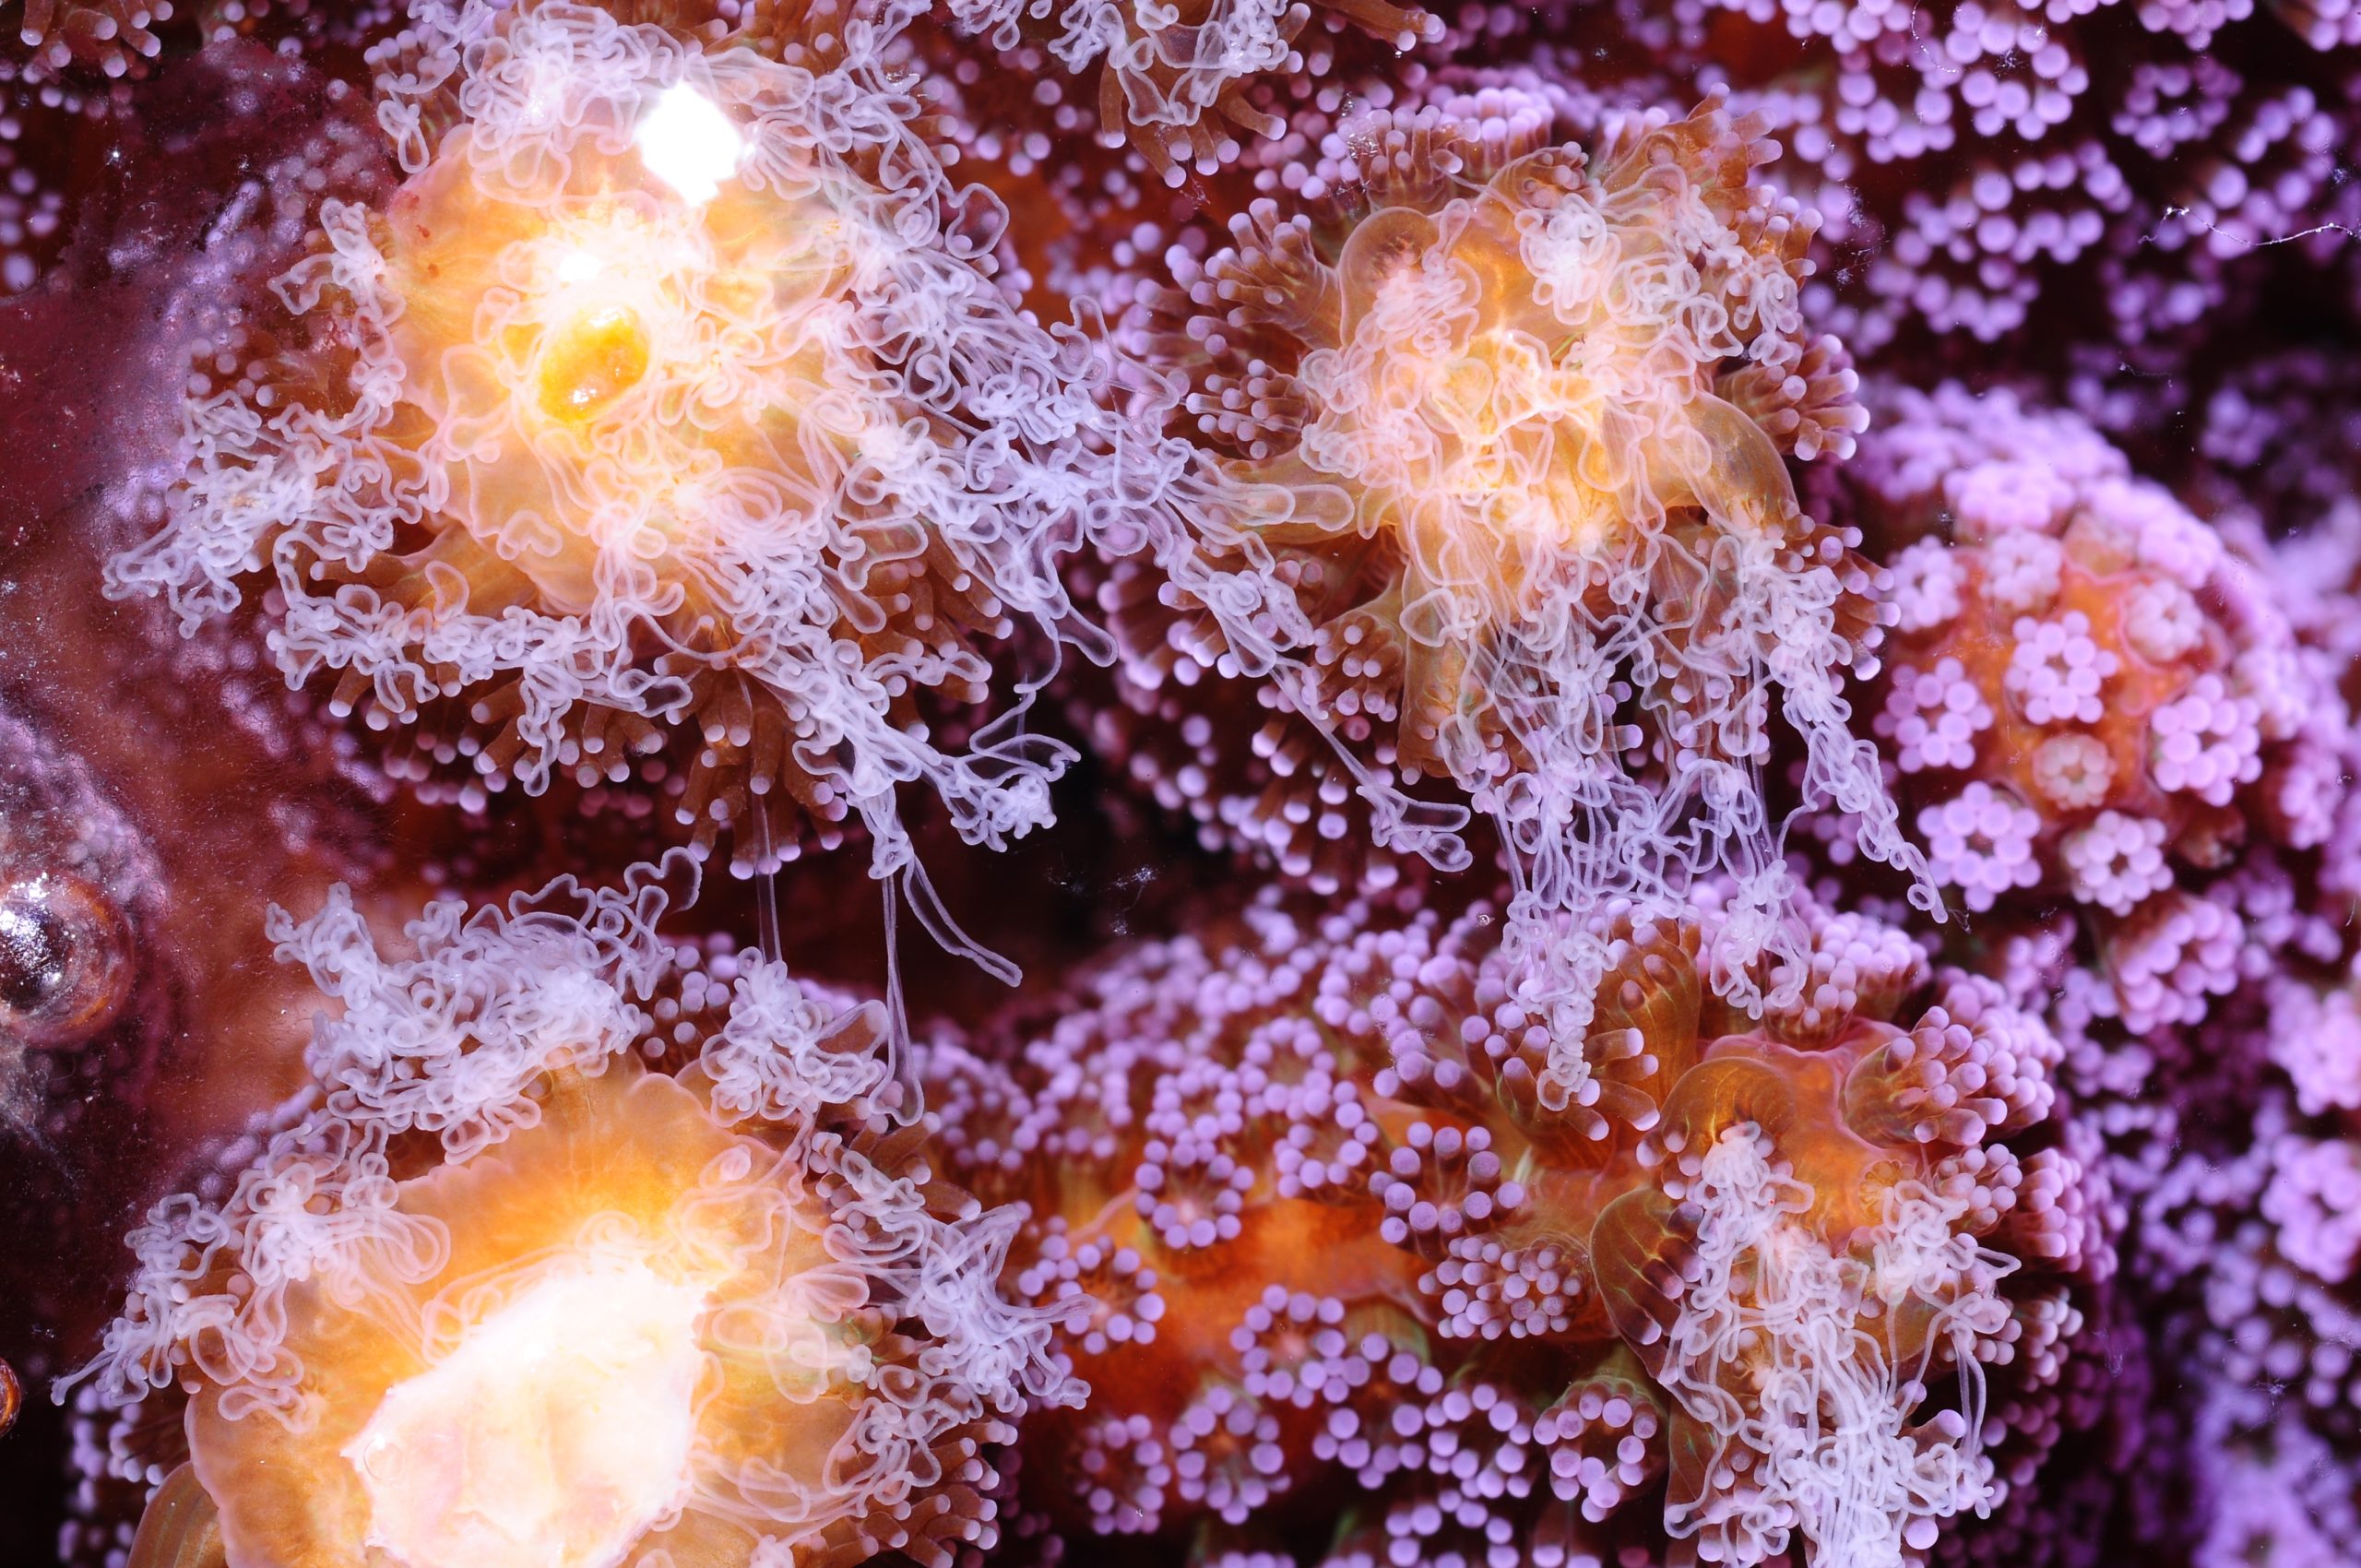 Coral Feeding: An Overview